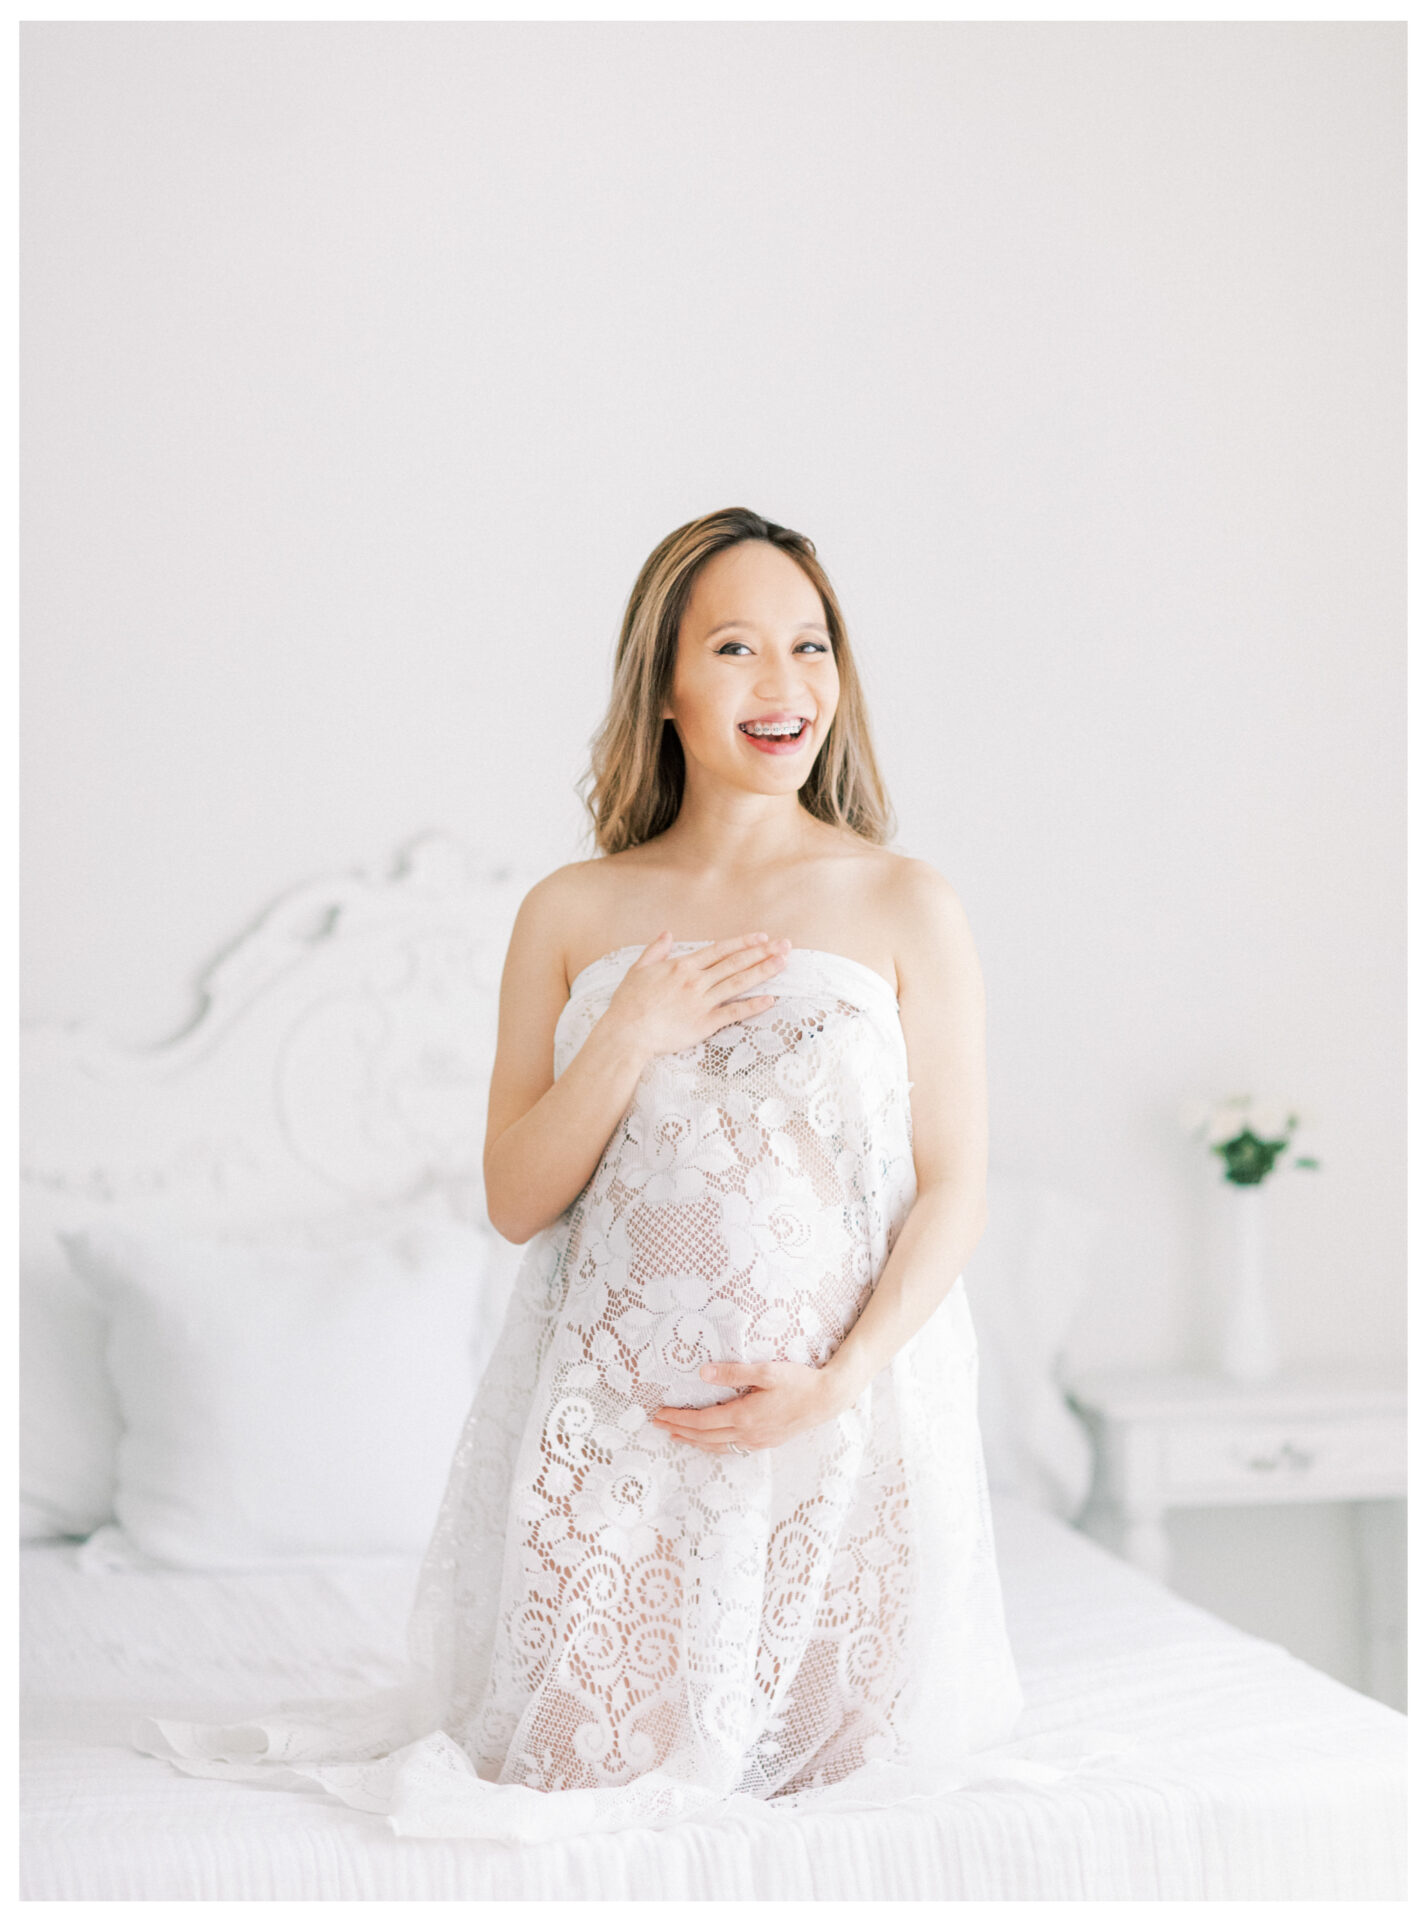 Winter Freire Photography | Fine Art Maternity Boudoir | Expecting mother holding vintage lace smiling